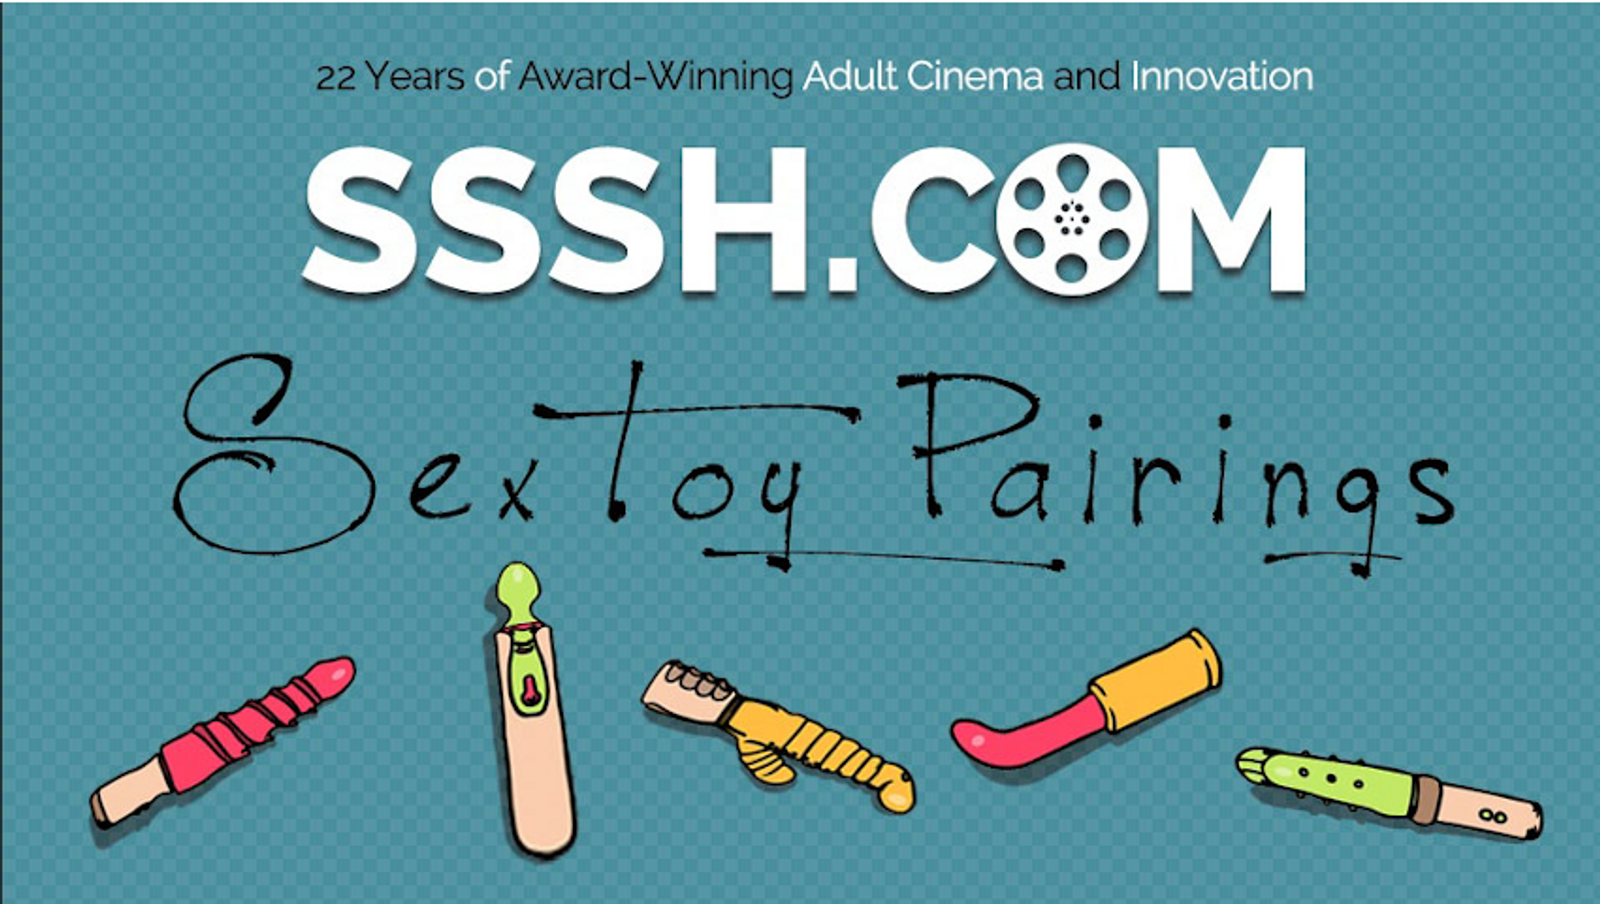 Sssh.com Now Offering Sex Toy Pairings With Their Movies